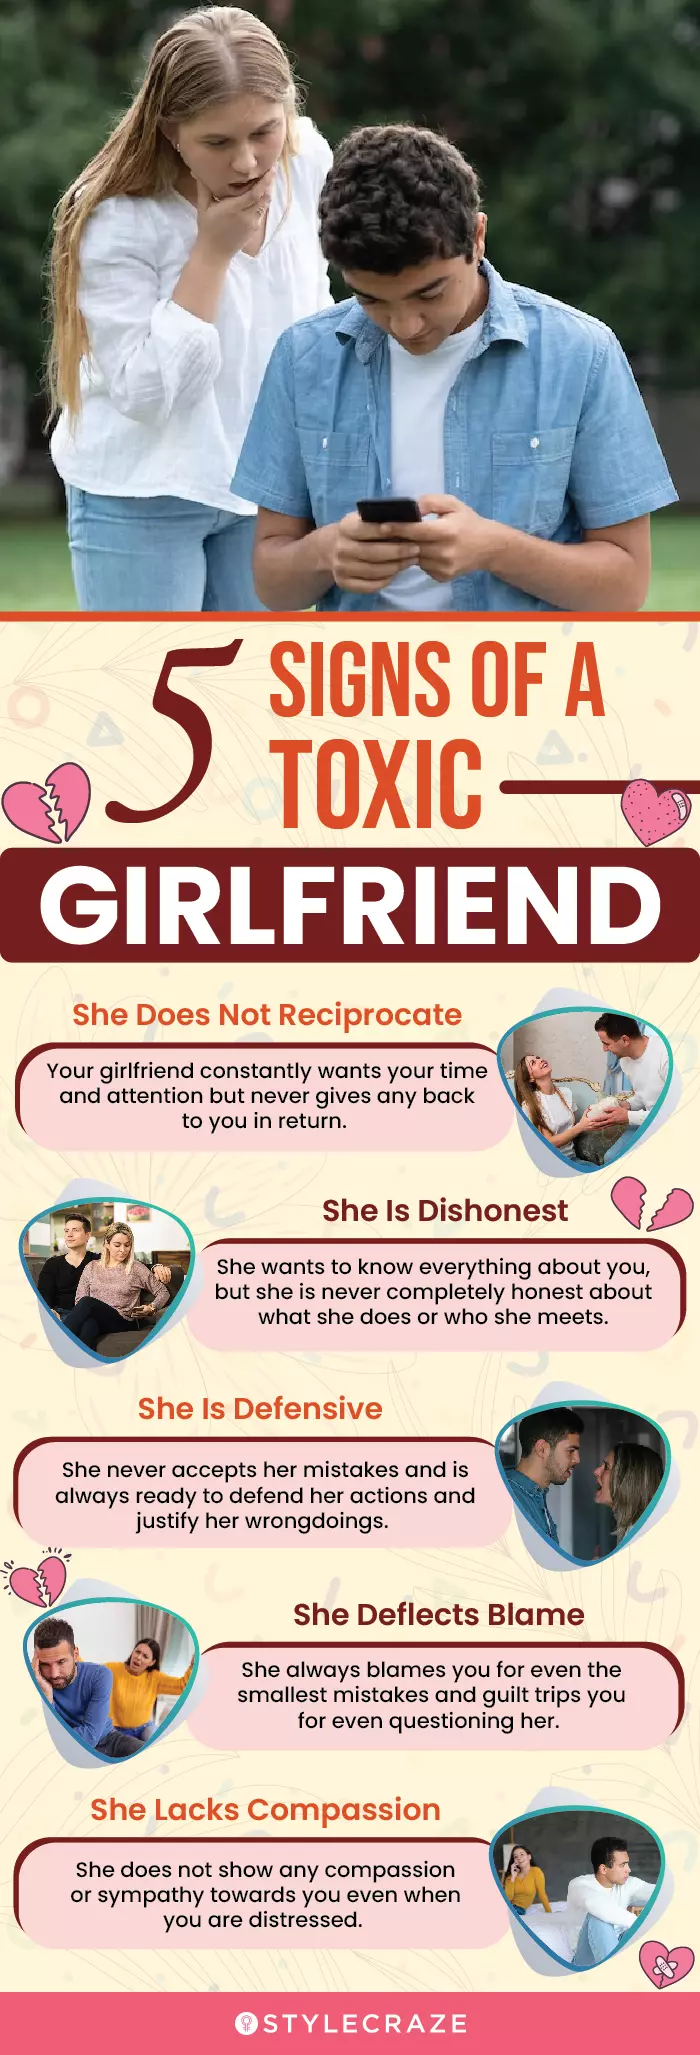 5 signs of a toxic girlfriend (infographic)